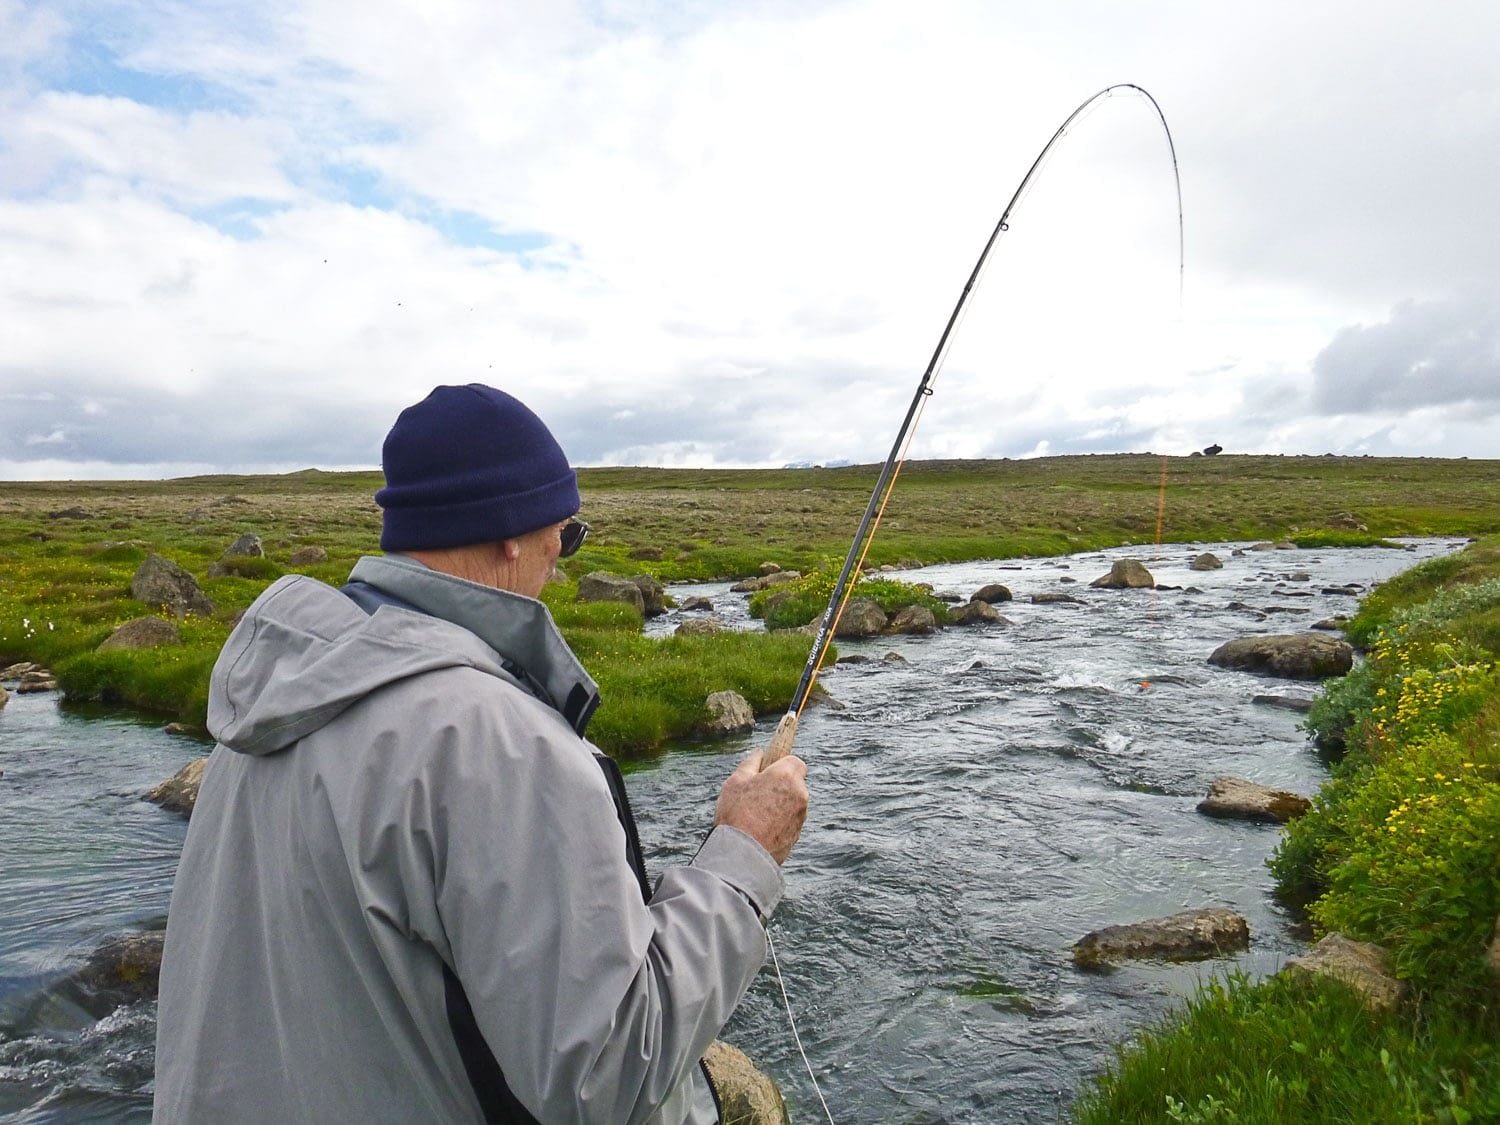 Fishing in the highlands is a peaceful and serene experience, allowing anglers to truly connect with nature